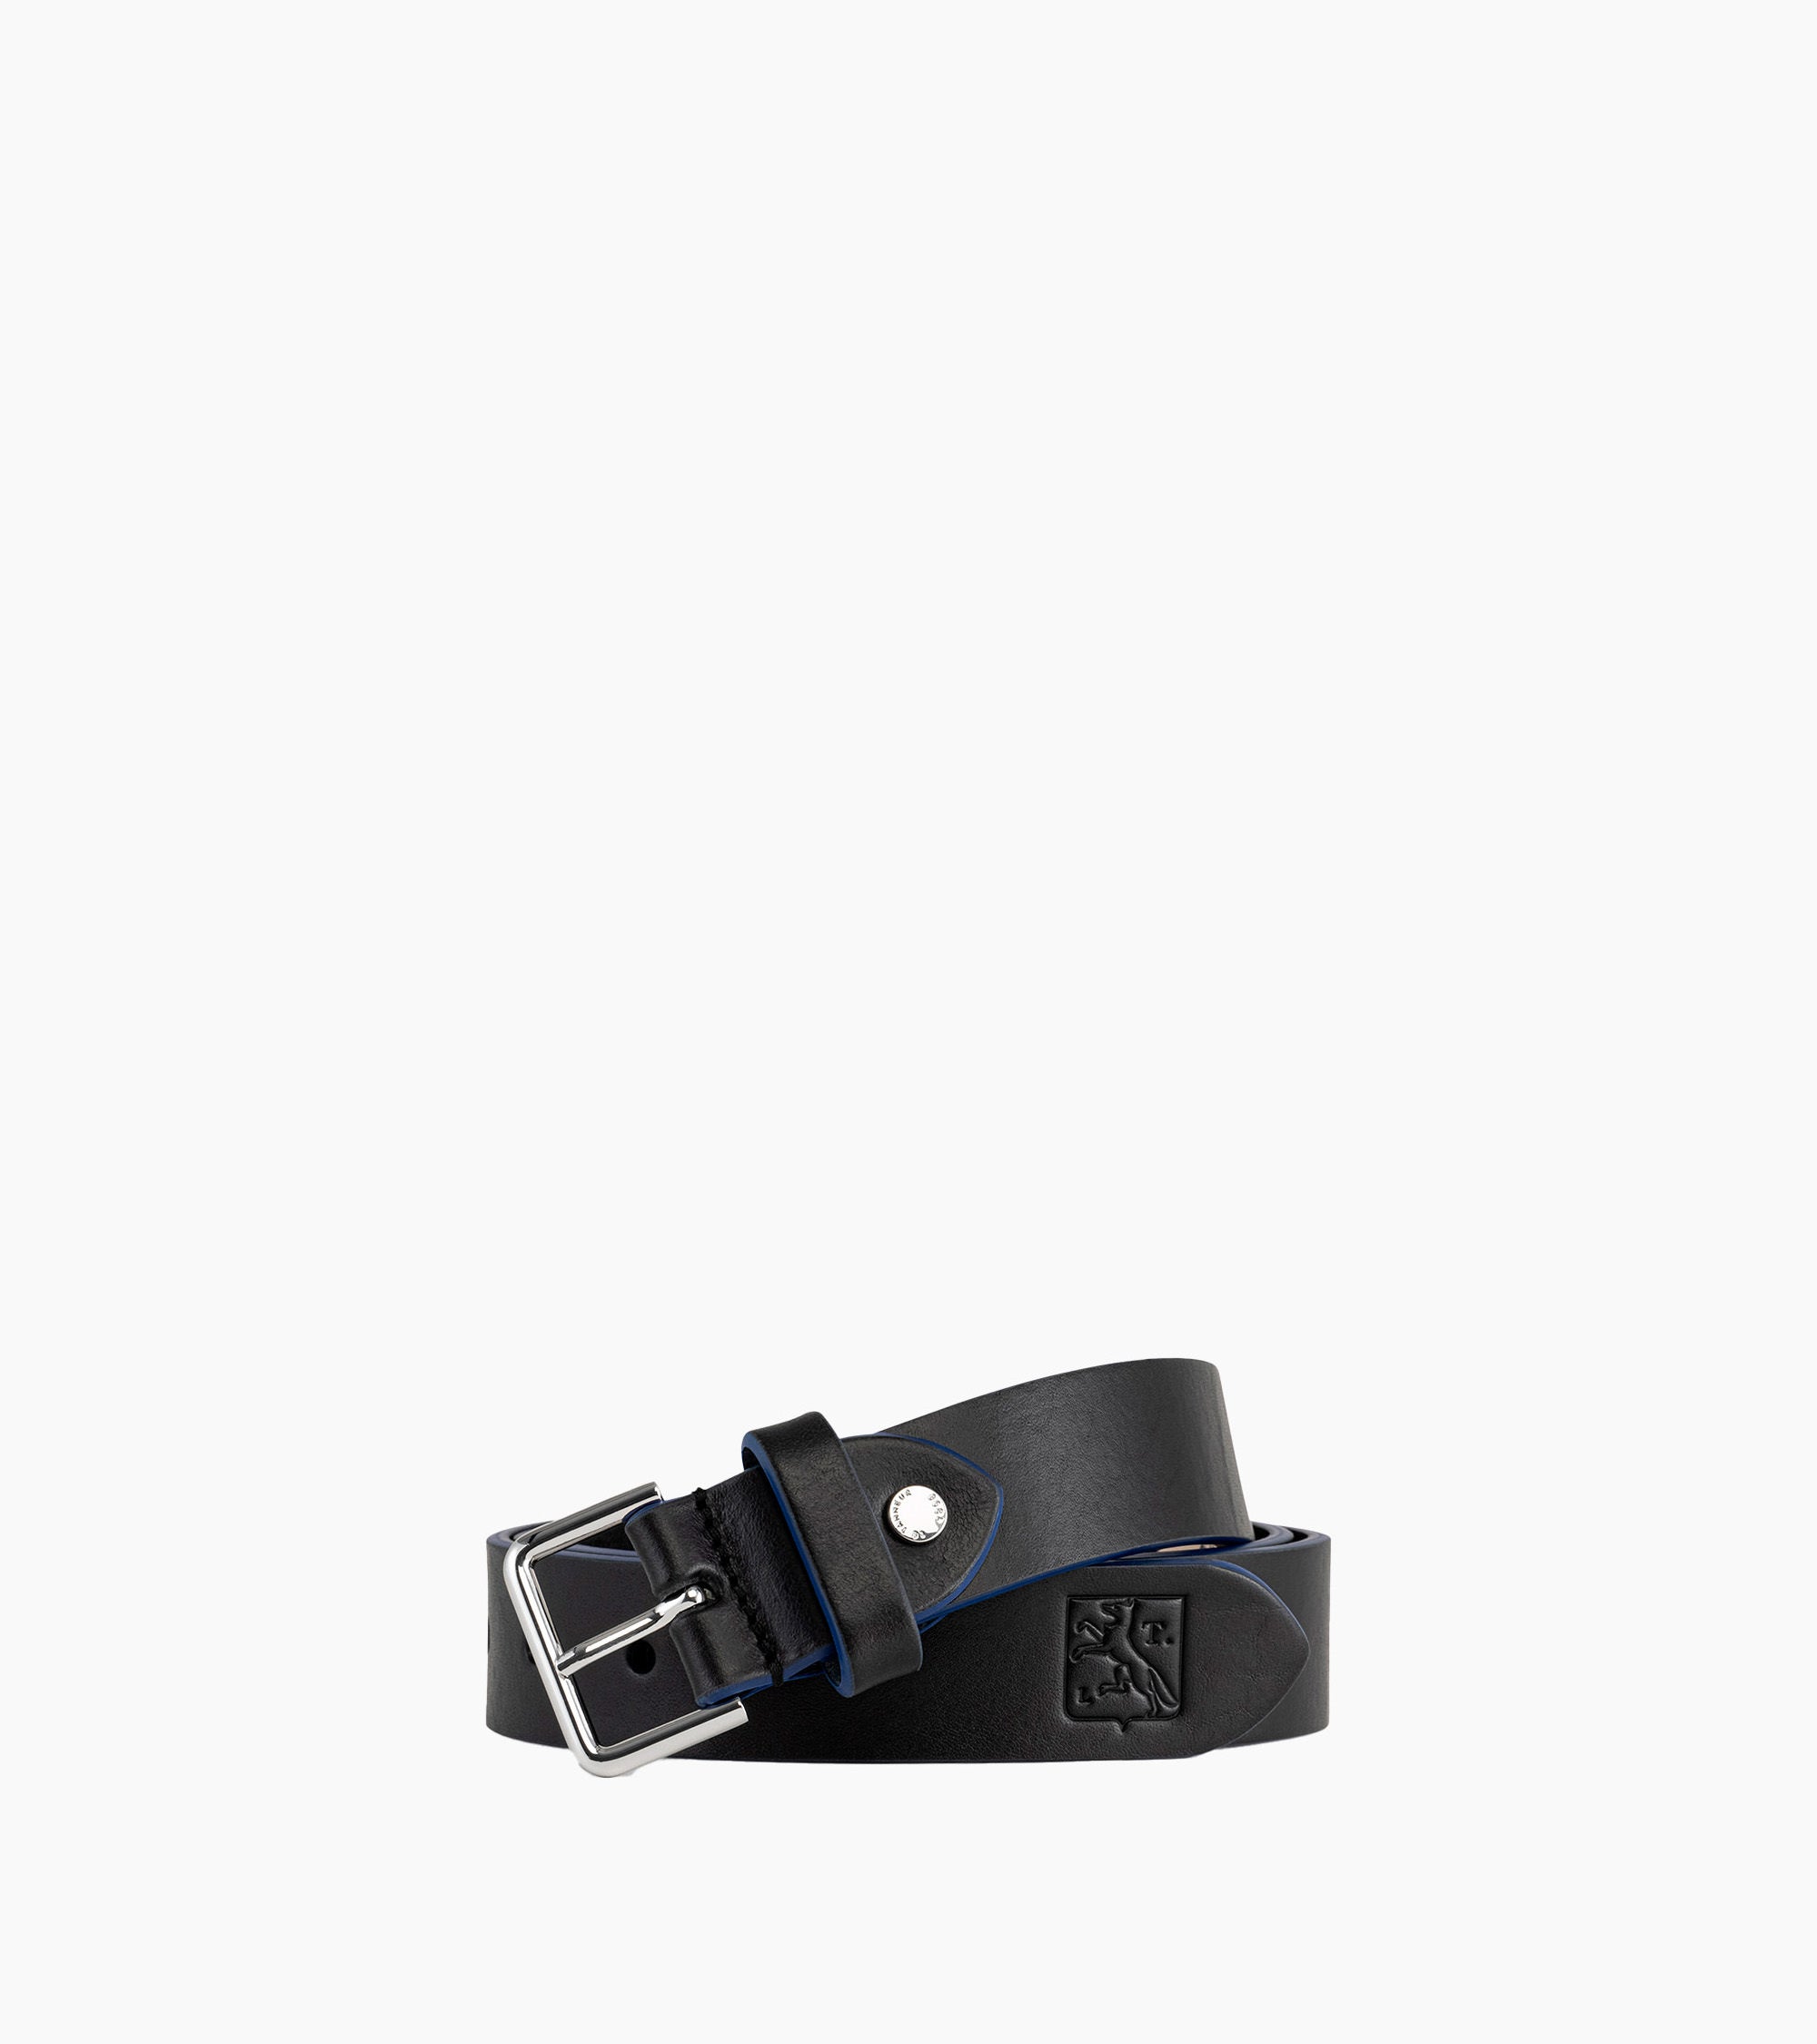 Men's belt with square buckle in smooth leather